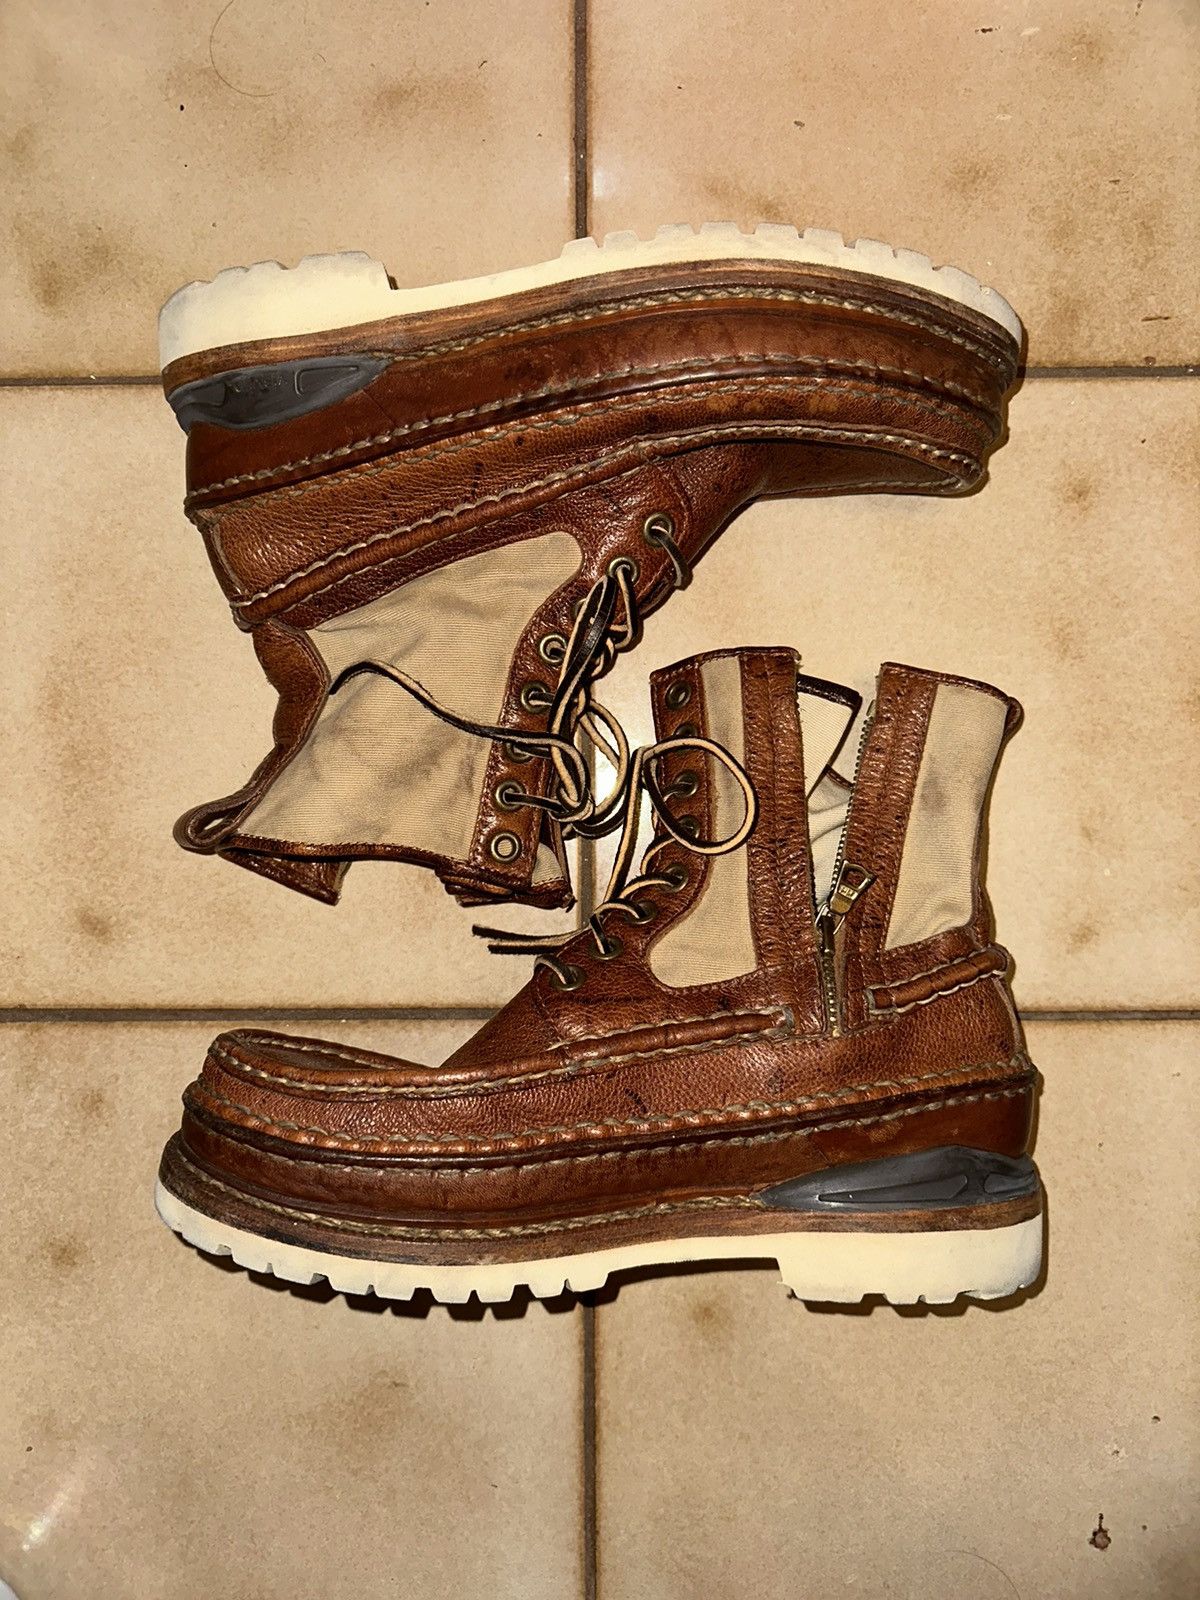 Visvim Grizzly Boots | Grailed